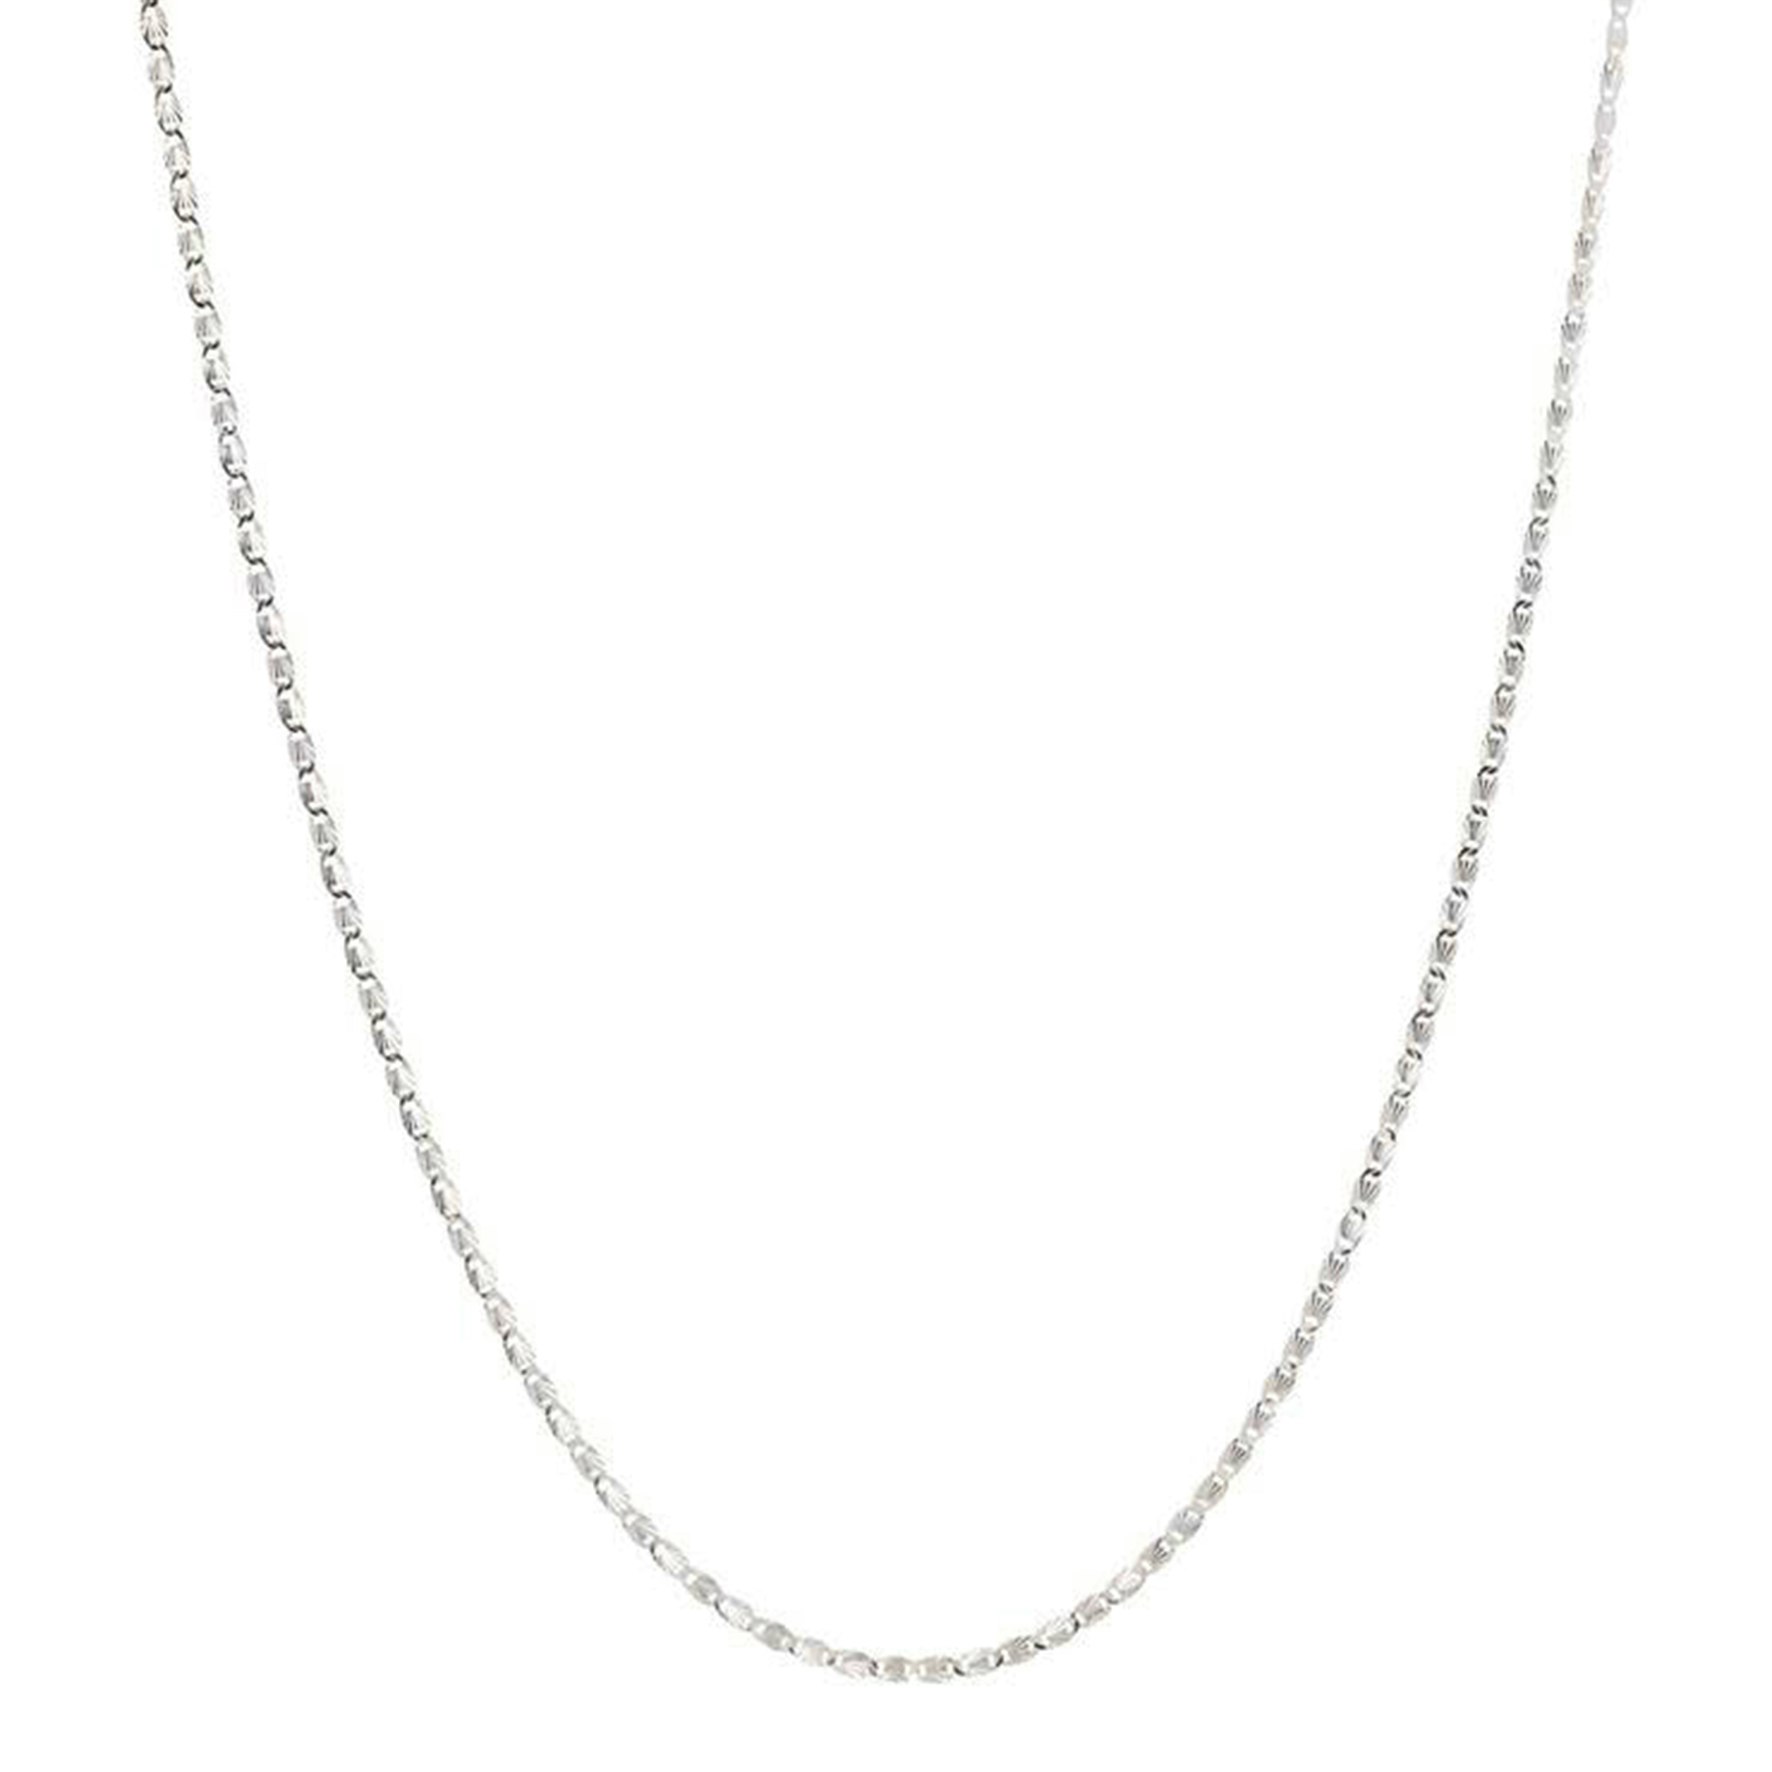 Gilly Necklace from Pico in Silver Sterling 925